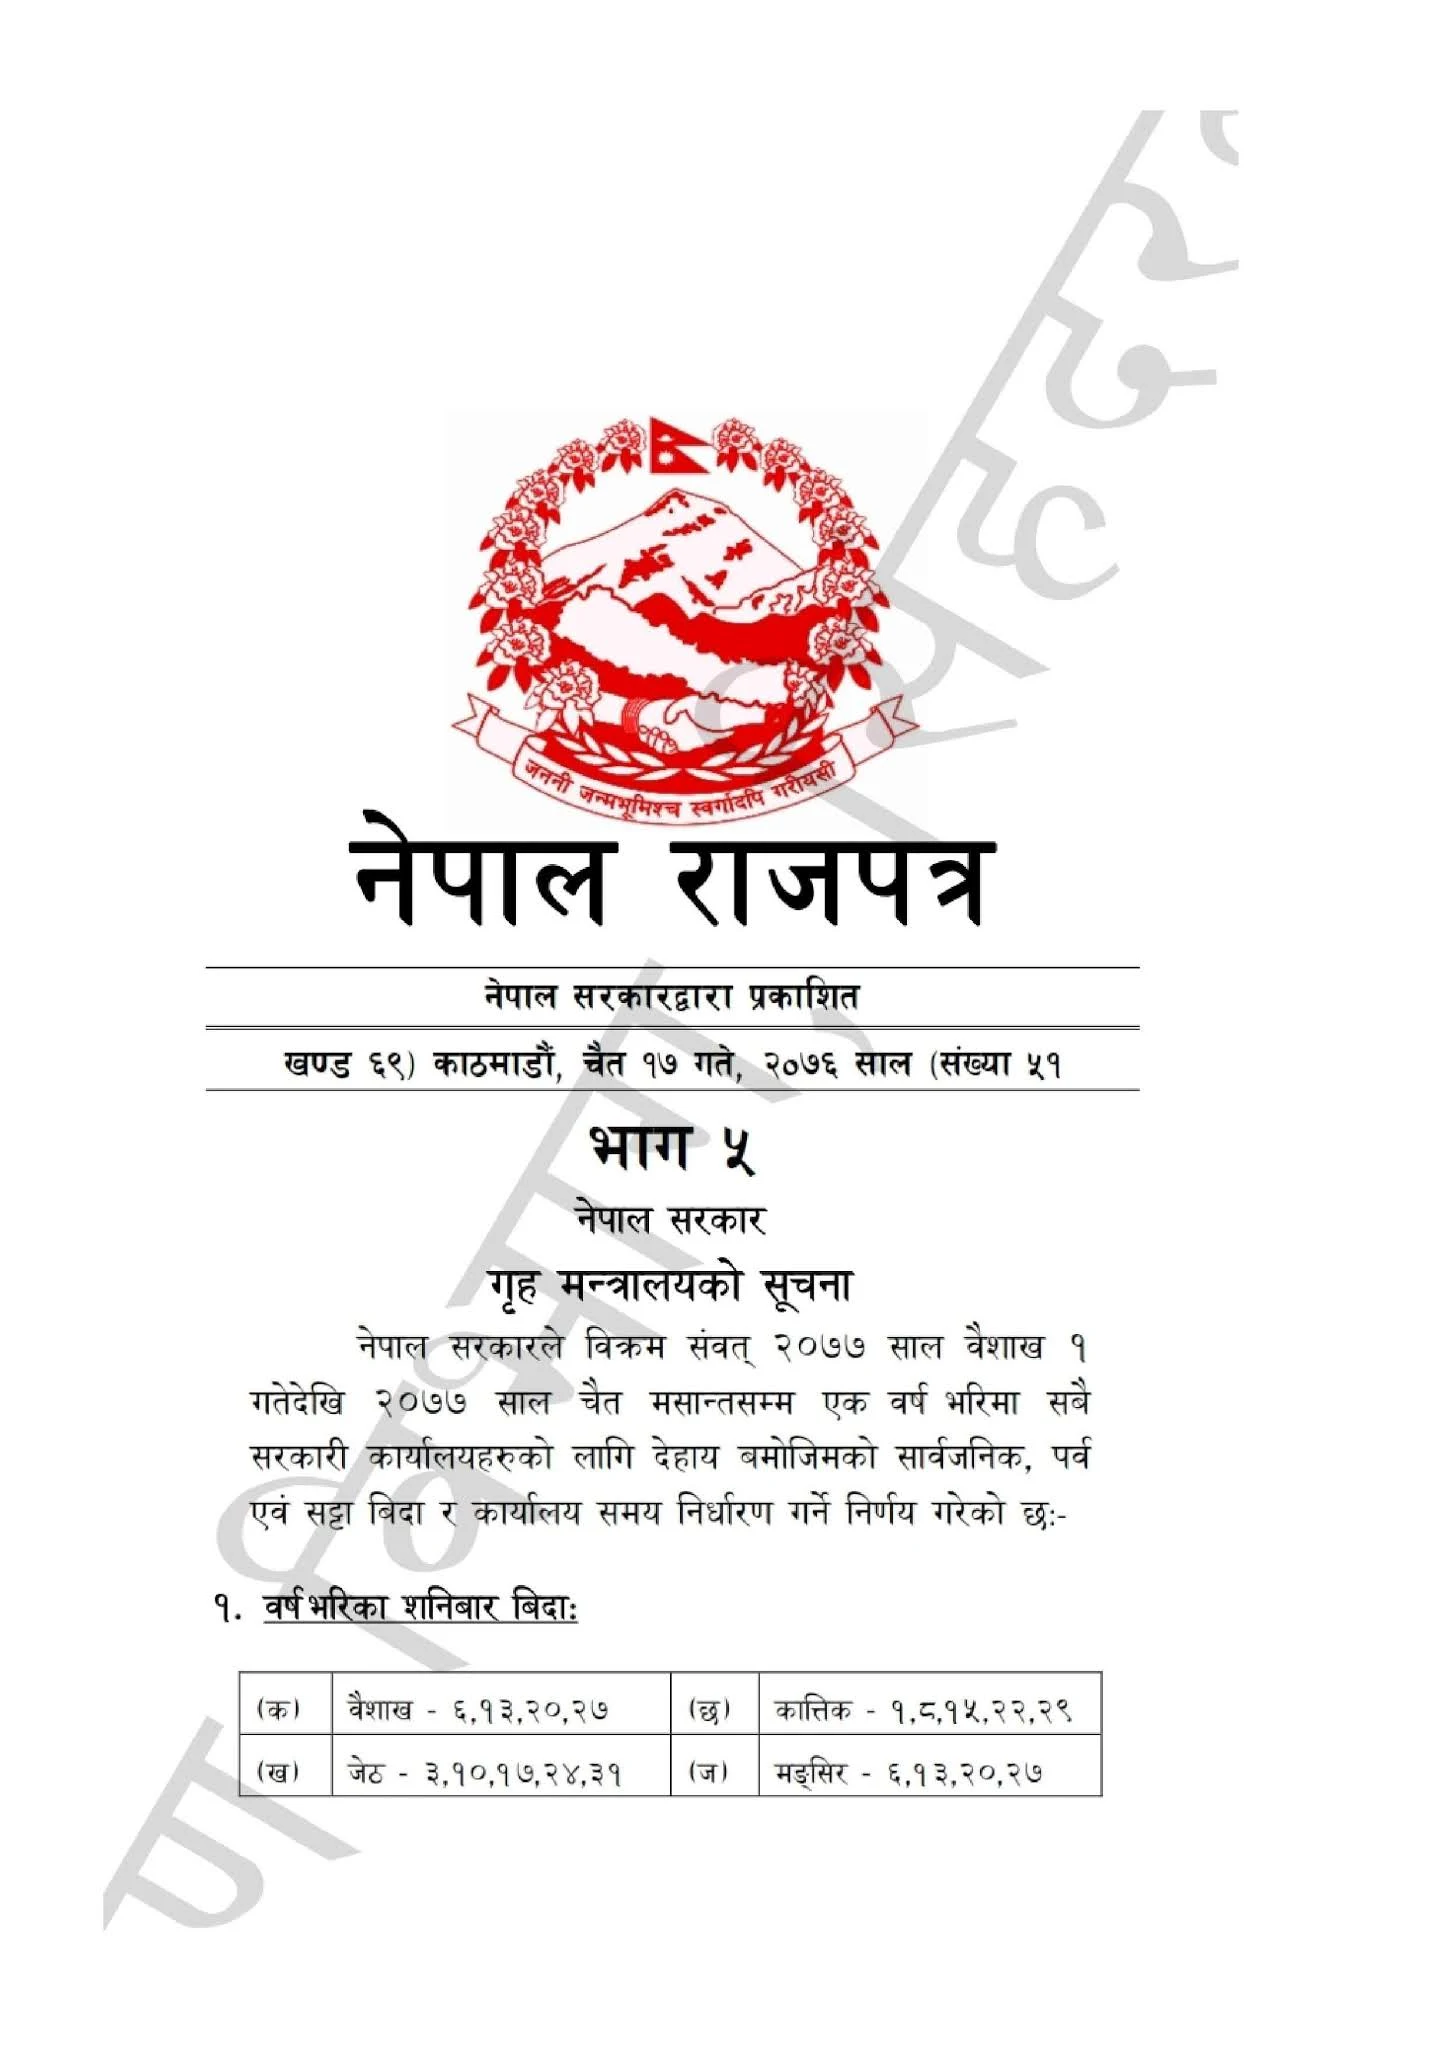 List of Public Holidays in Nepal for 2077 BS